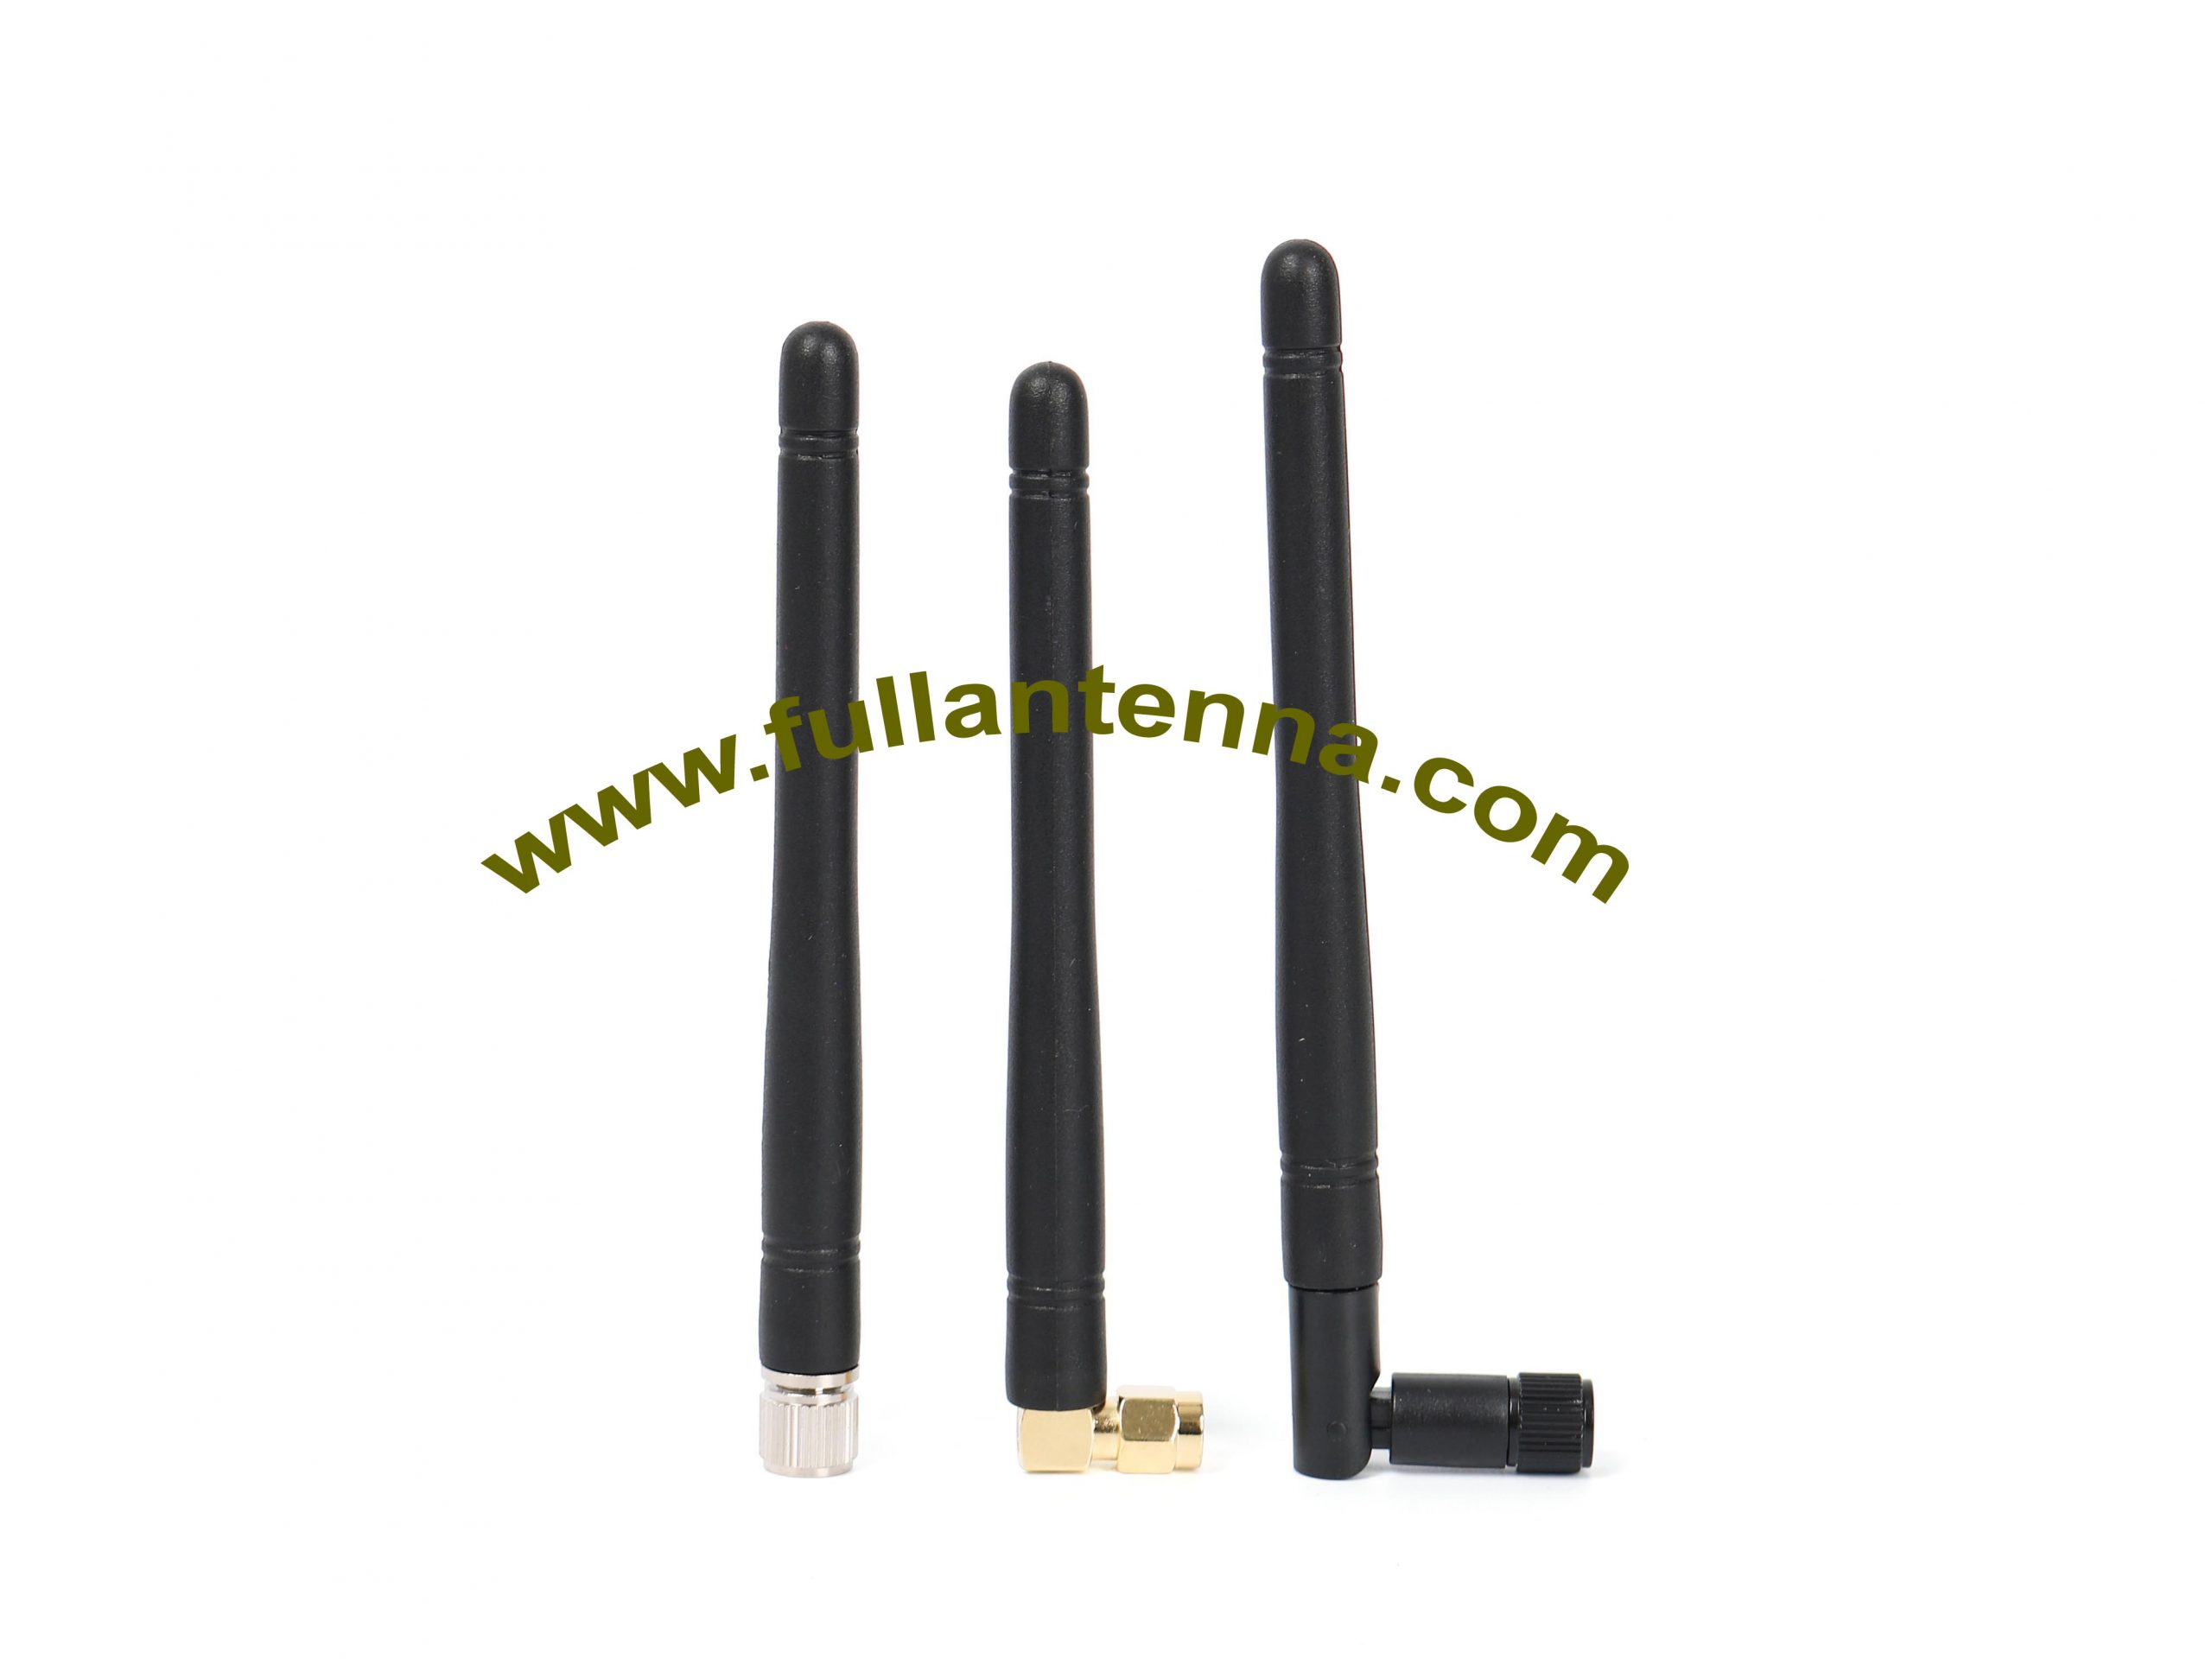 OEM Manufacturer Diy 3g Antenna - P/N:FA3G.0302,3G Rubber Antenna, 3G SMA straight right angle or rotation male connector – Fullantenna